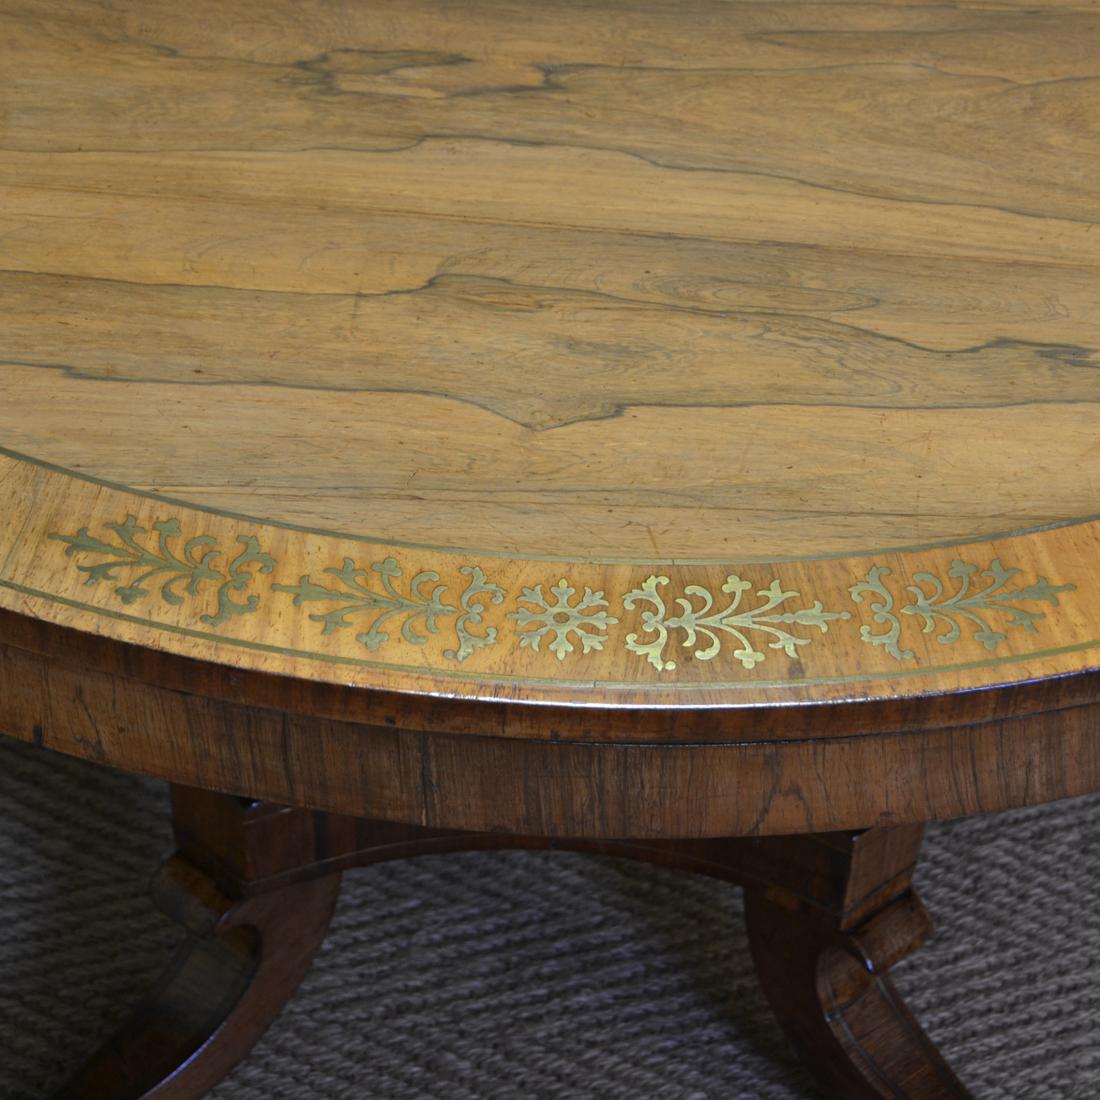 Spectacular mellow rosewood and brass inlaid Regency circular centre table.

Of magnificent quality and extremely unusual with brass inlay, this Regency circular centre table dates from circa 1830. It has a circular beautifully figured top which